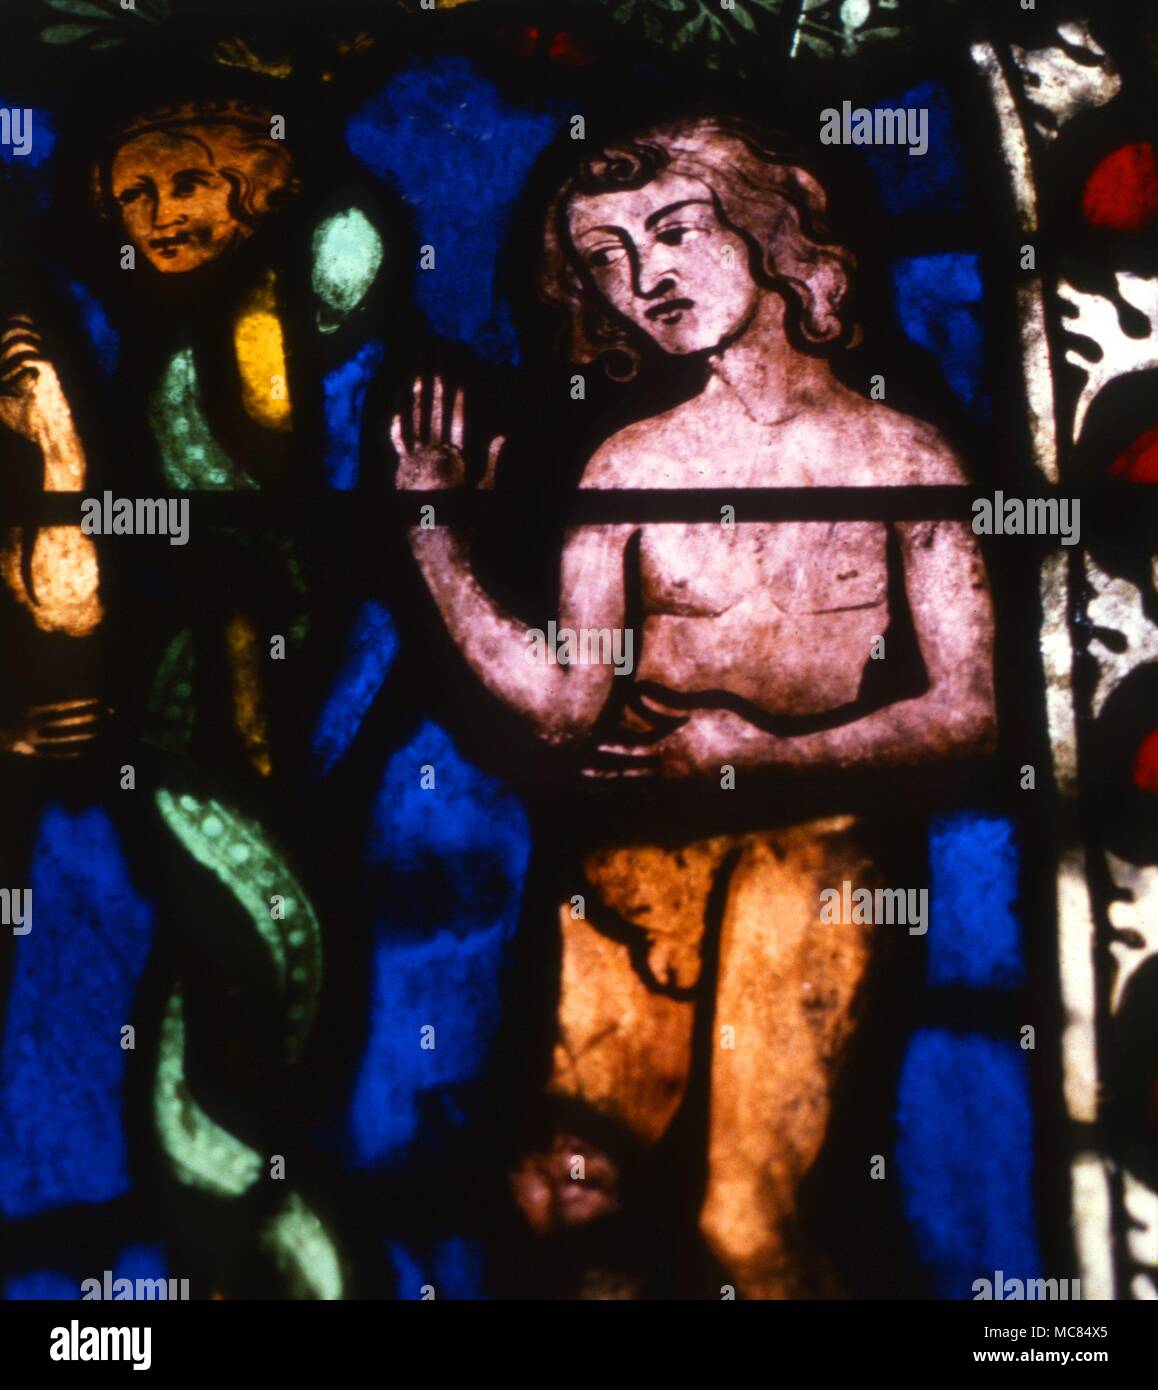 Satan in the form of the tempting serpent, curled around the Tree, tempting Eve to eat the fruit. Adam looks on in astonishmen. Fourteenth-century stained glass in the church of St. Etienne, in Mulhouse, France. Stock Photo